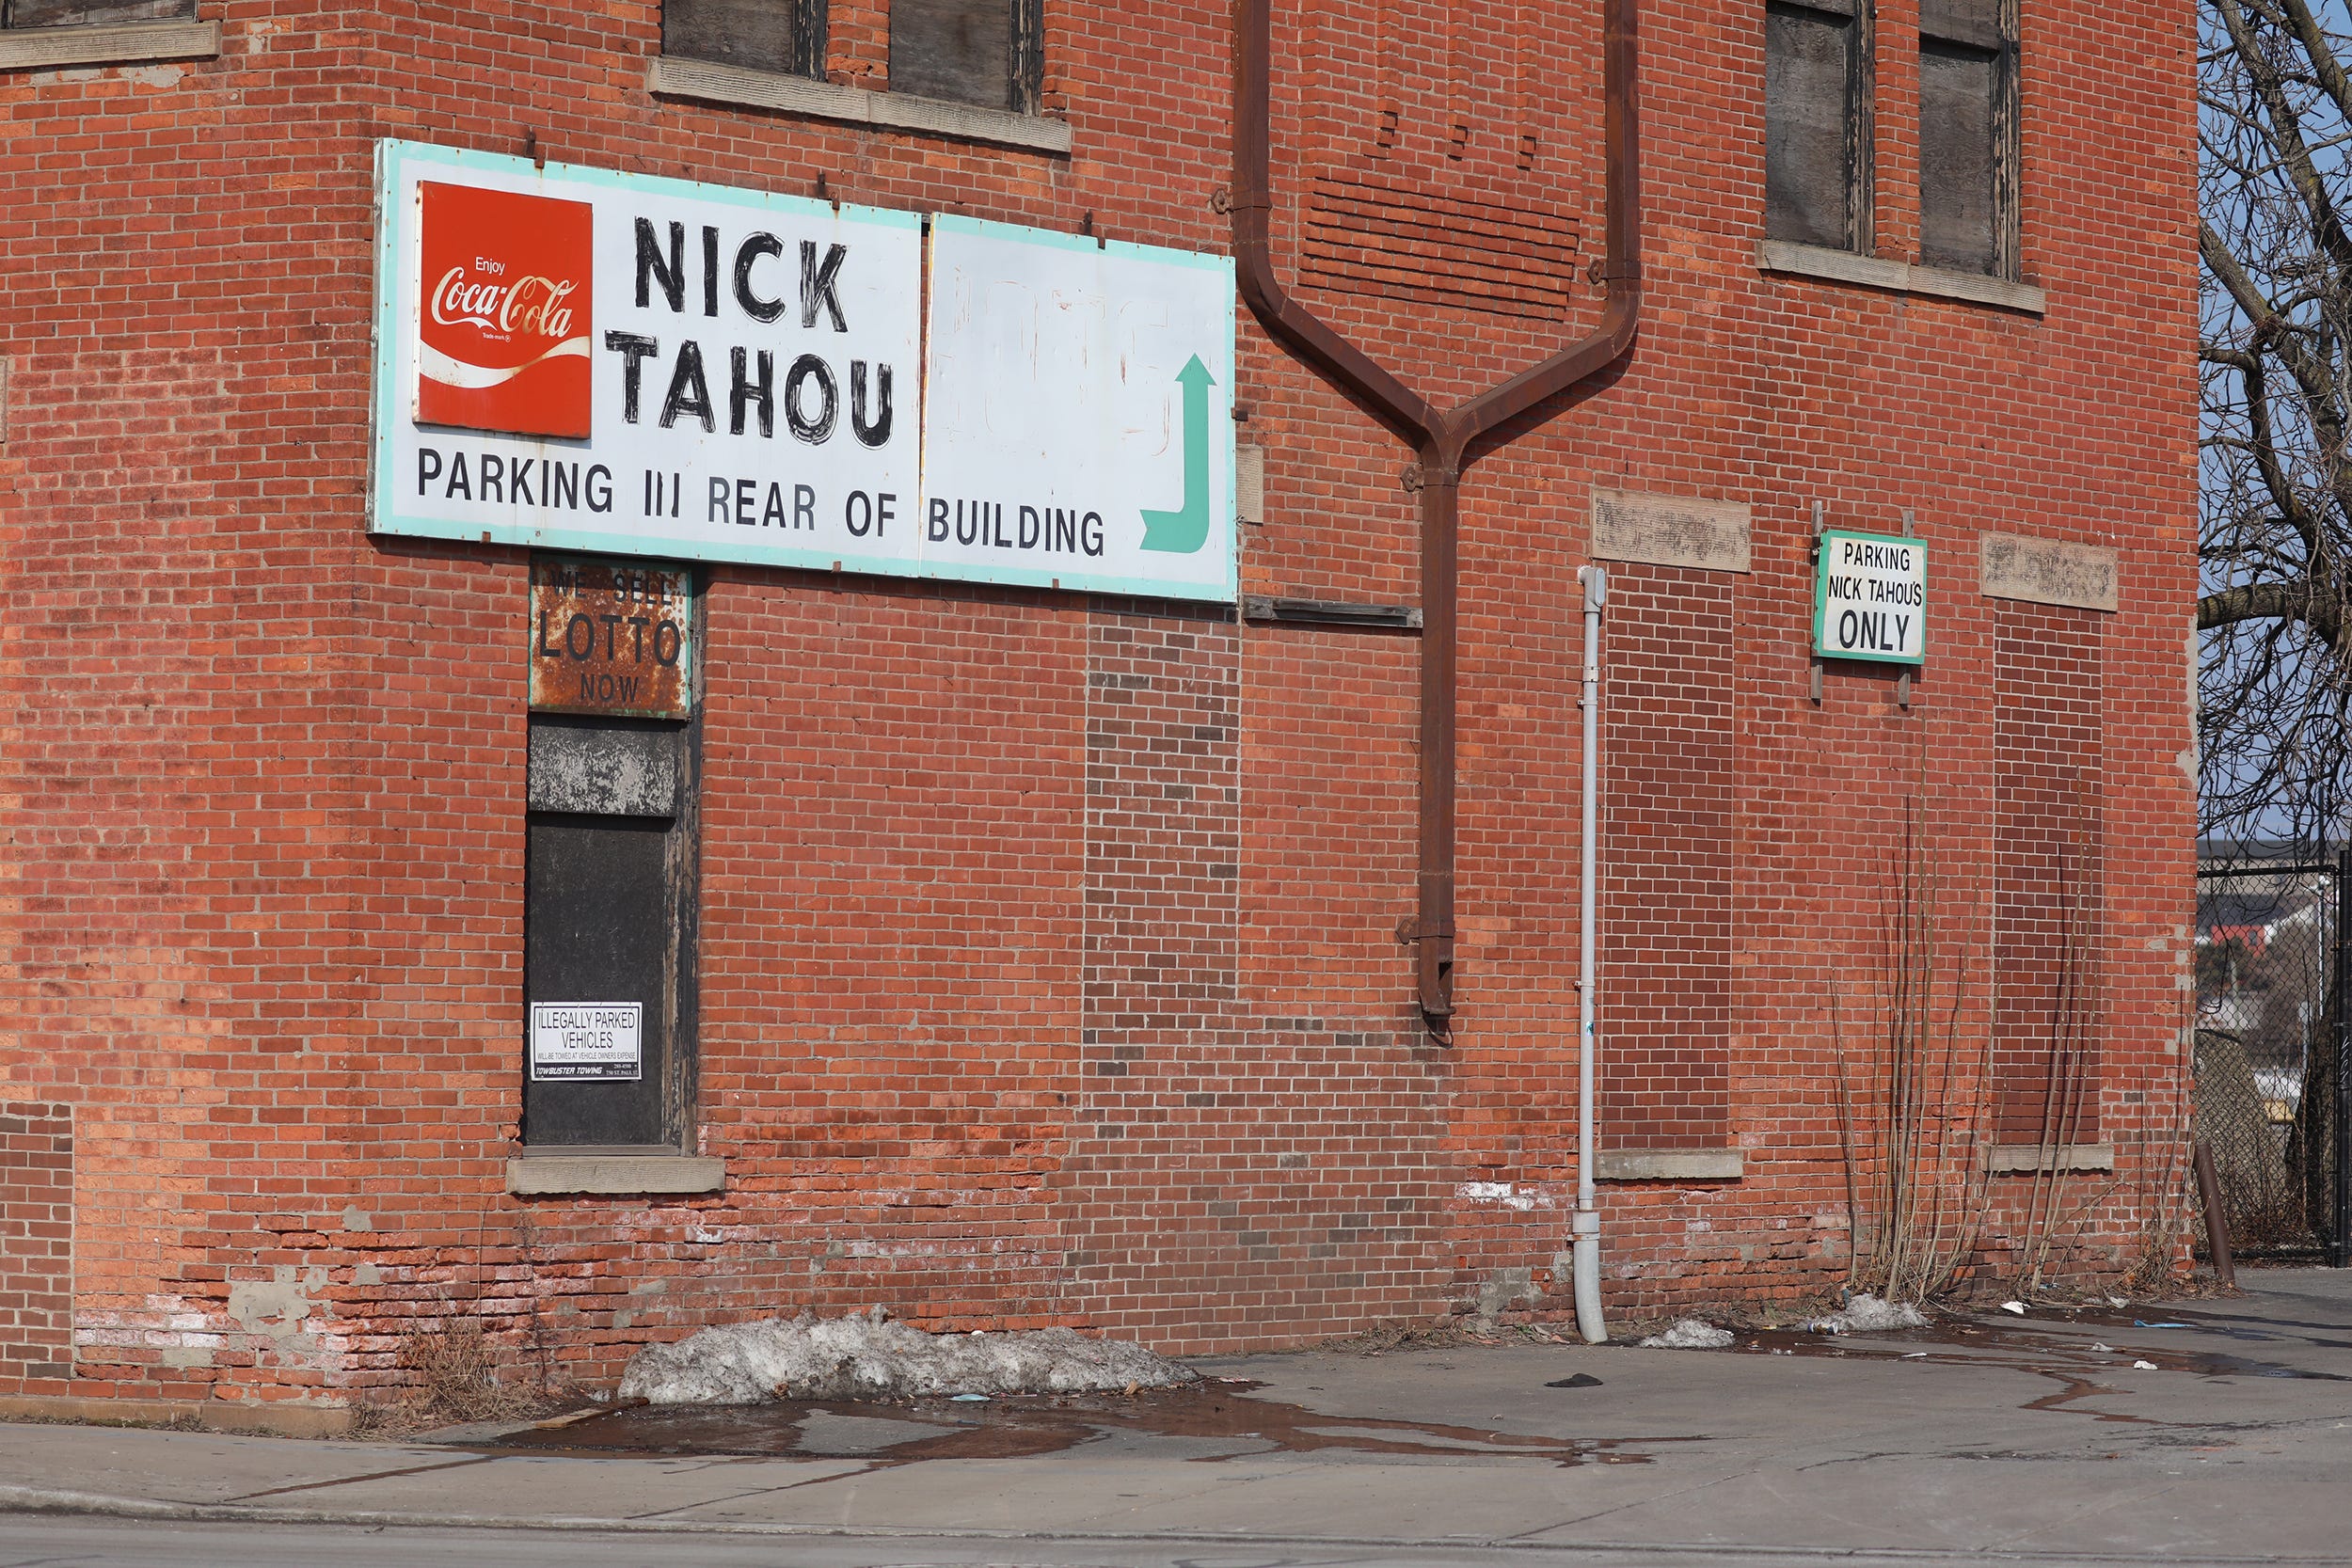 When regulars think Nick Tahou Hots, they think of this iconic brick building and its vintage sign. The building, now up for sale, was once...